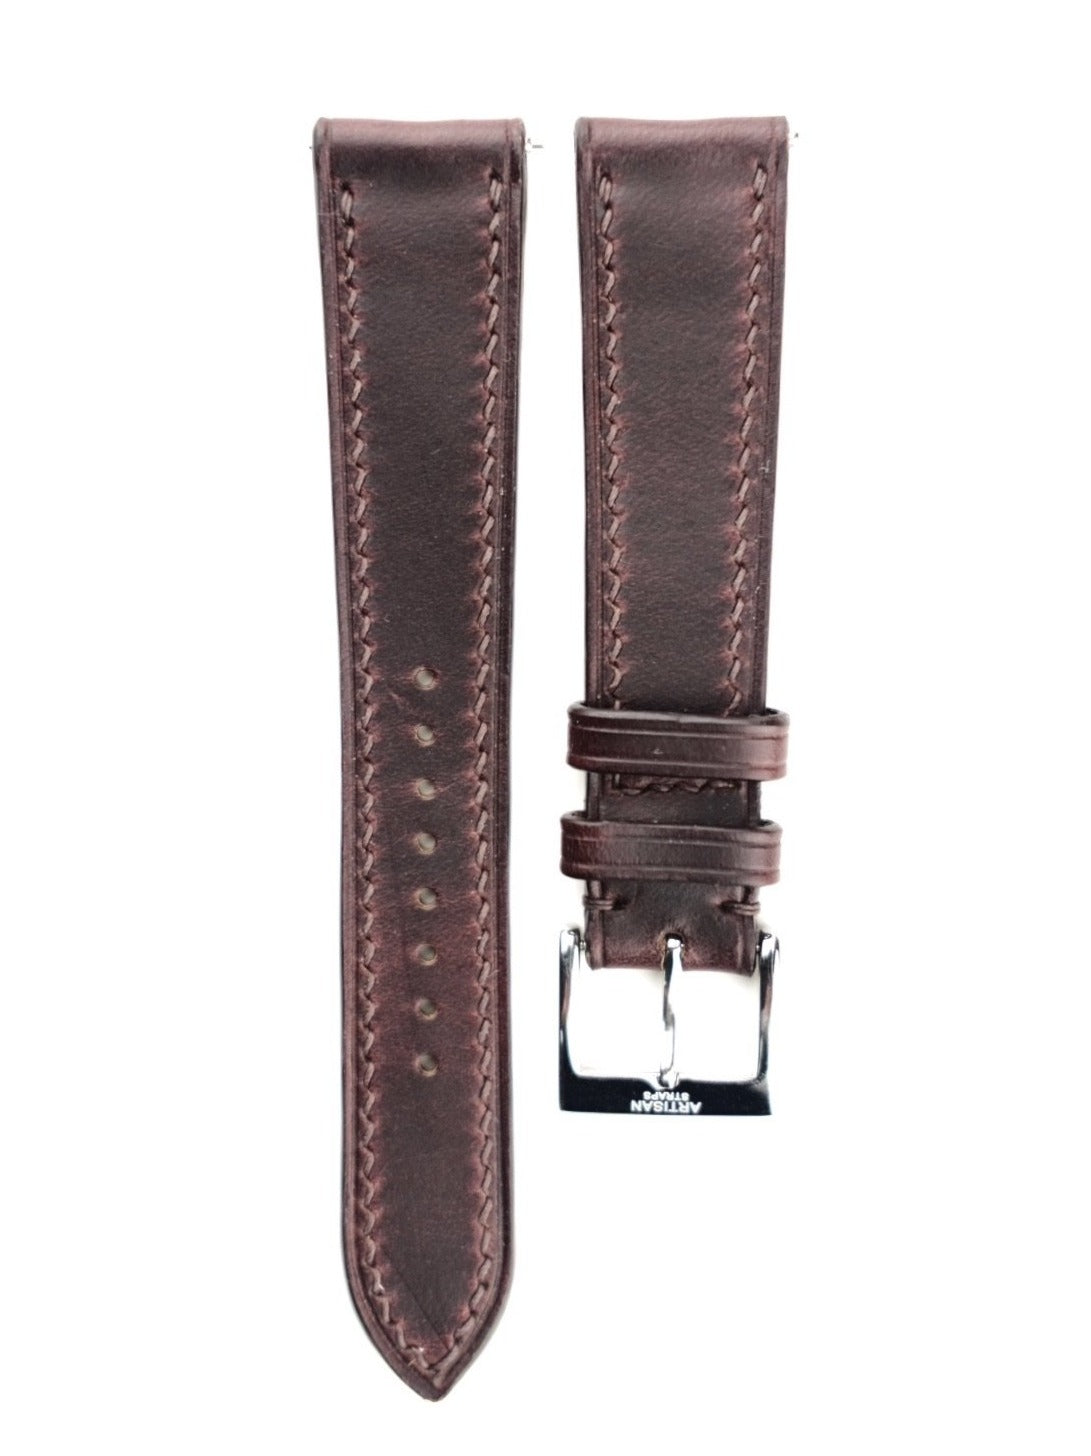 Horween Chromexcel Calf Leather Strap in Colour #8 - Artisan Straps